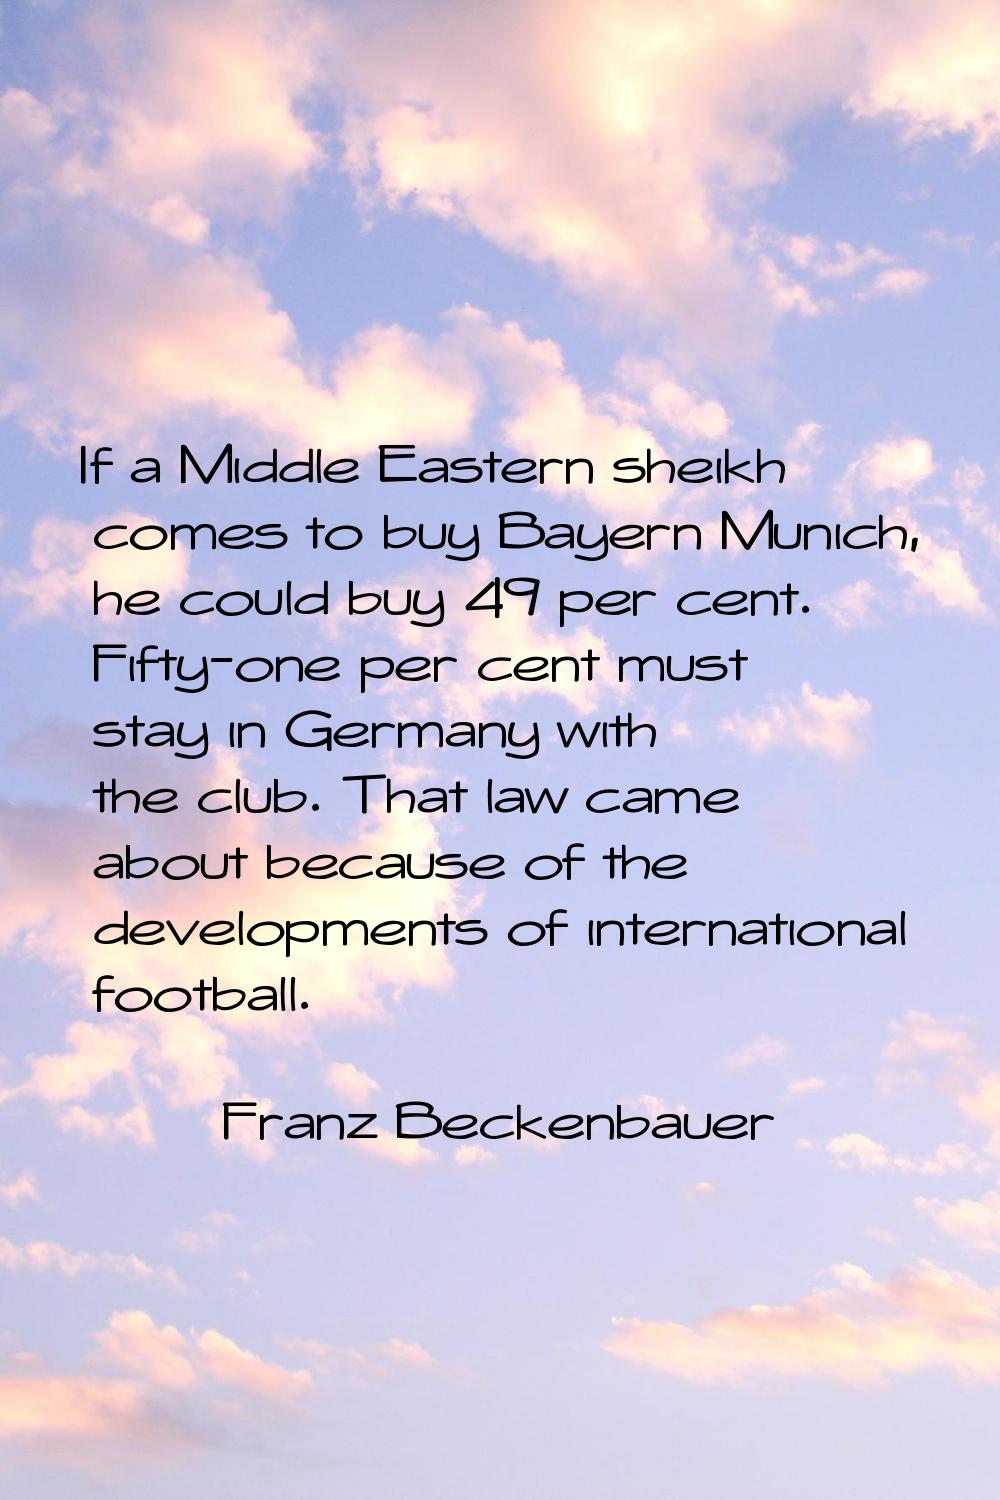 If a Middle Eastern sheikh comes to buy Bayern Munich, he could buy 49 per cent. Fifty-one per cent